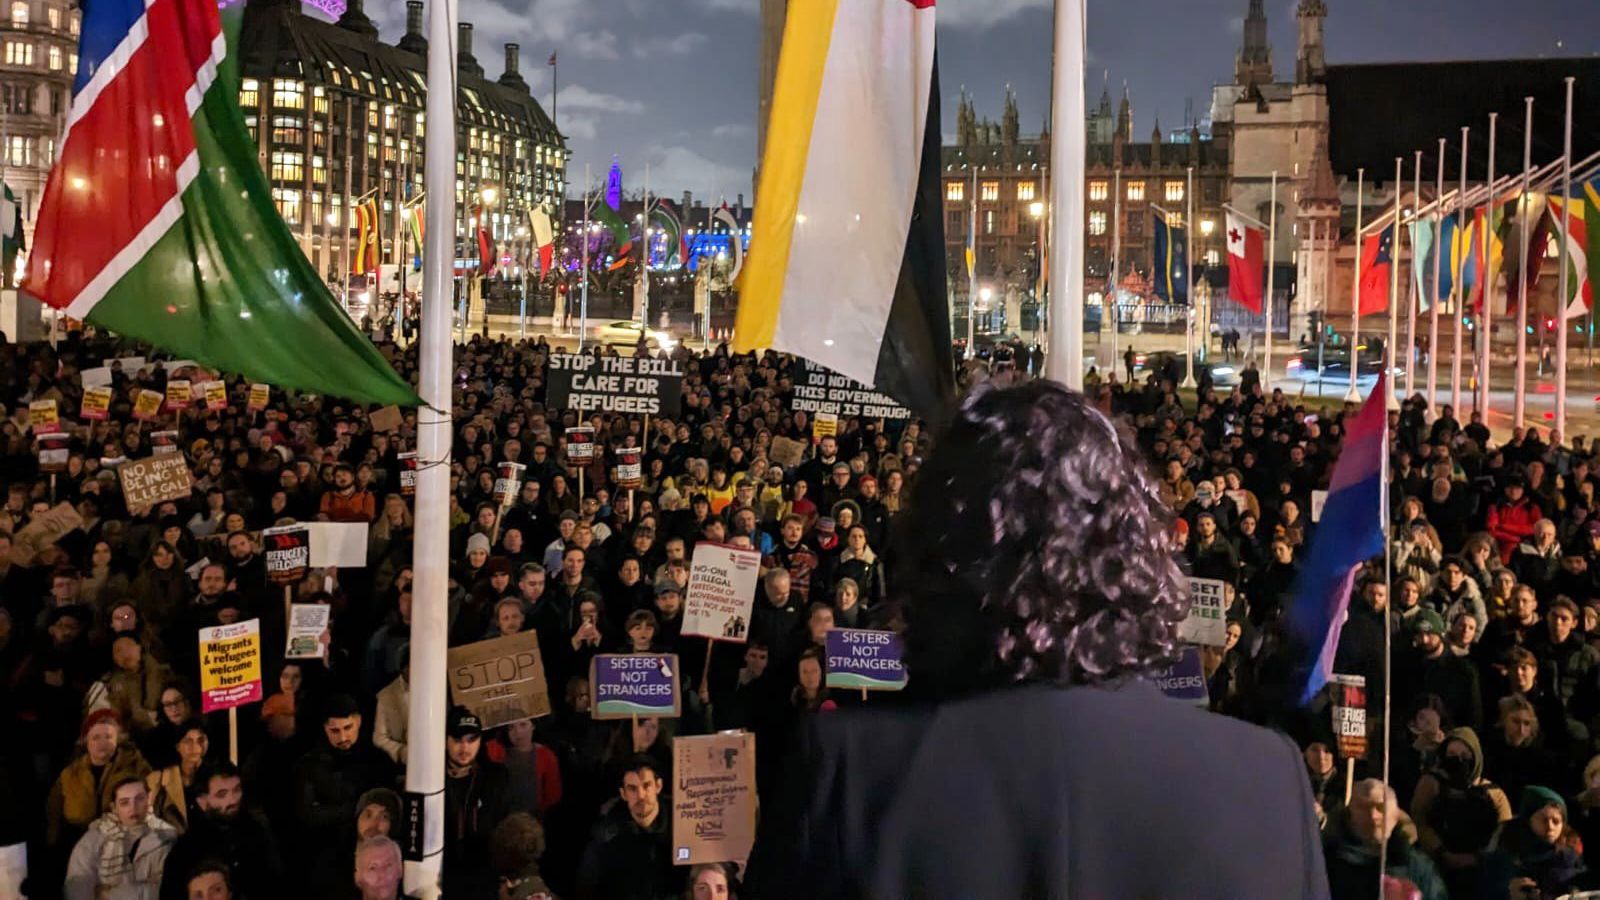 Nadia addressing a demonstration outside Parliament against the Illegal Migration Bill